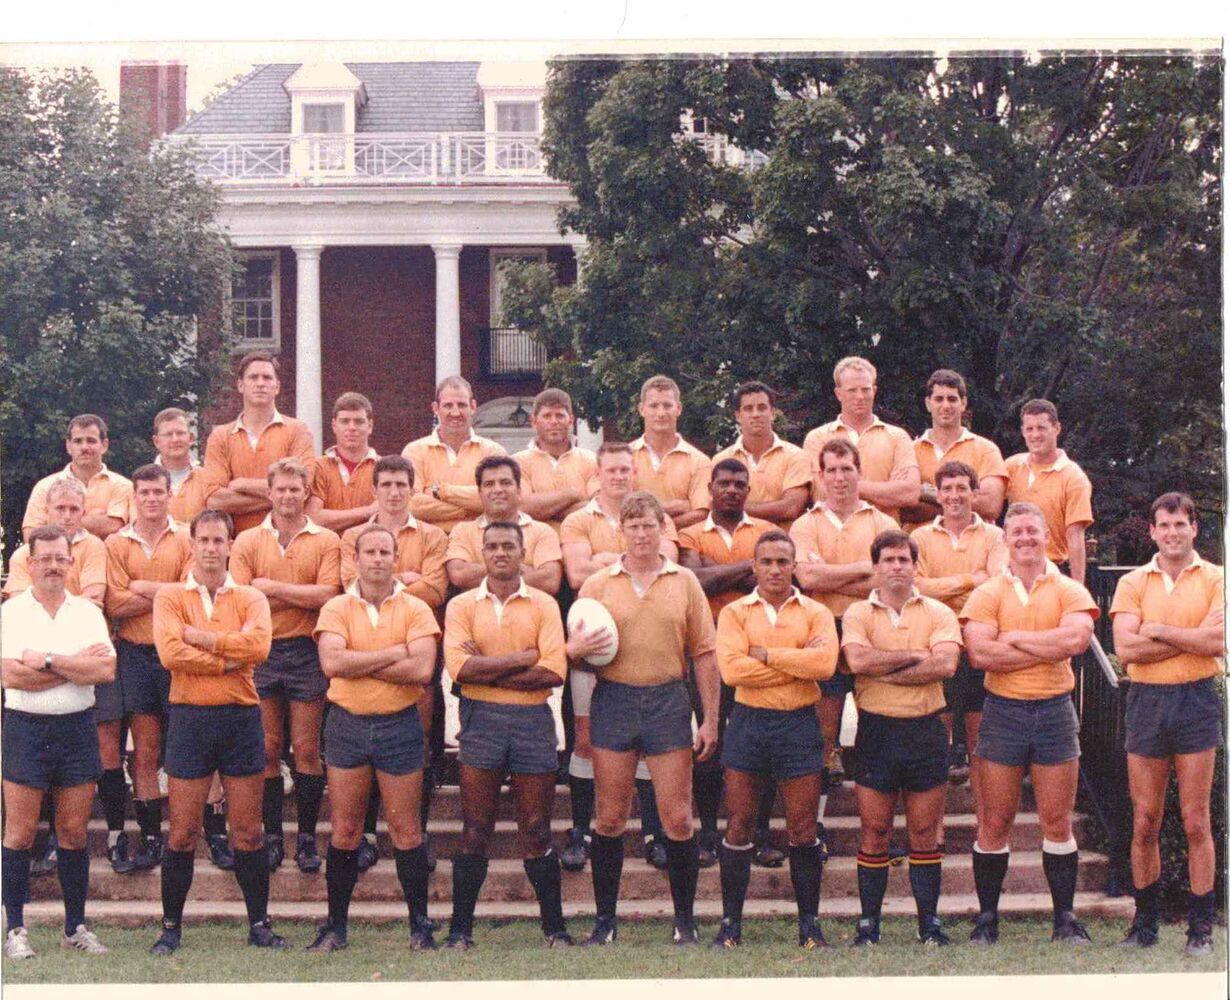 1st Row: O'Connor (mgr), Carter (coach), Parker, Tonga, Flaherty (capt), Fethiere, Morrison, Trumps, Stewart, 2nd Row: Ottwell, Hickey, Spears, Haydn, Galvan, Powers, Hardman, Dolan, Coburn, 3rd Row: Dell'Oreo, Altizer, Carter, Lauer, Gouthro, McAdams, Newman, Pollard, Thomas, Grosso, Trumps